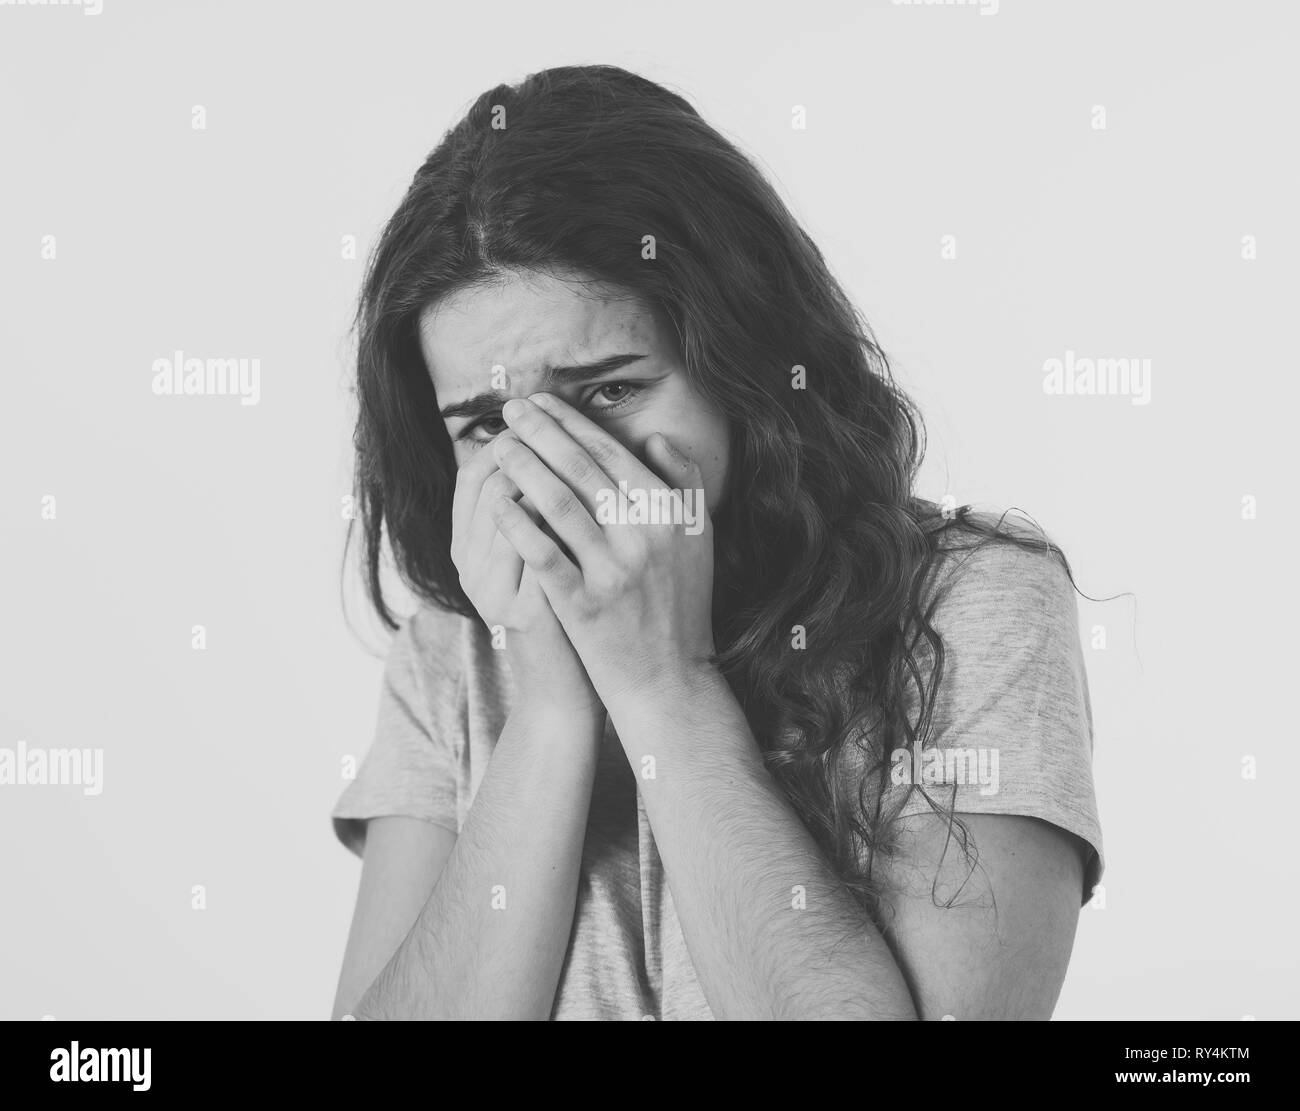 Close up portrait of scared and shocked young teenager female Looking surprised with fear in her eyes. People and Human expressions and emotions conce Stock Photo